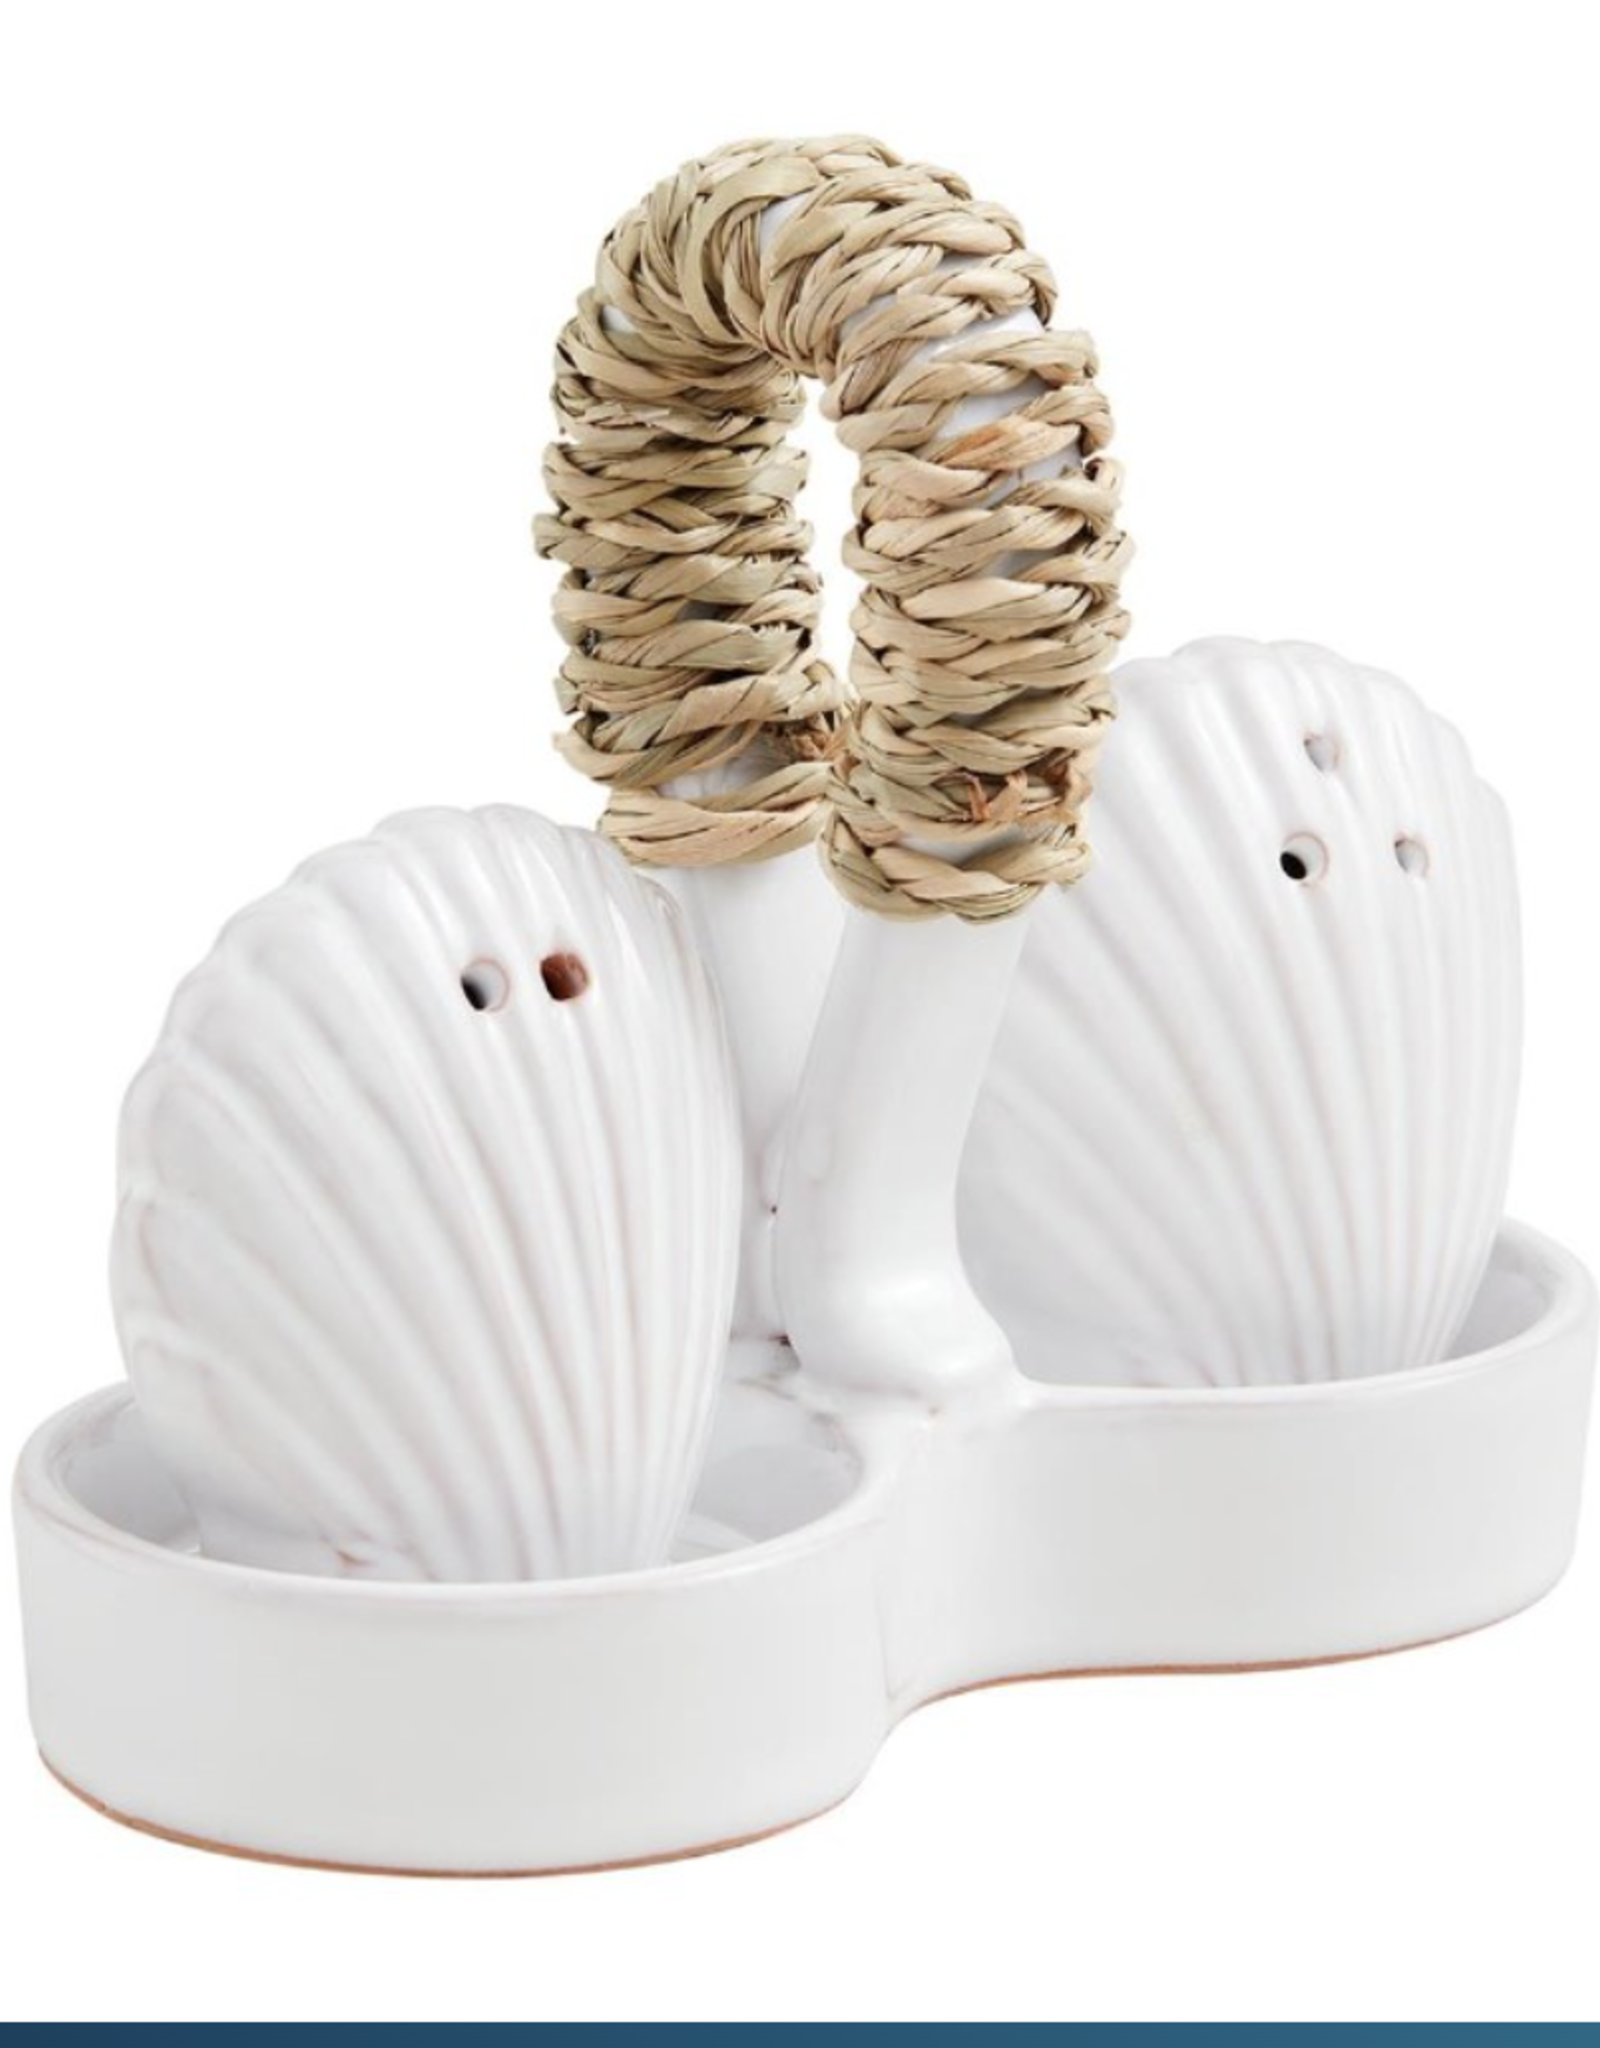 Mud Pie White Scallop Shell Salt and Pepper Set